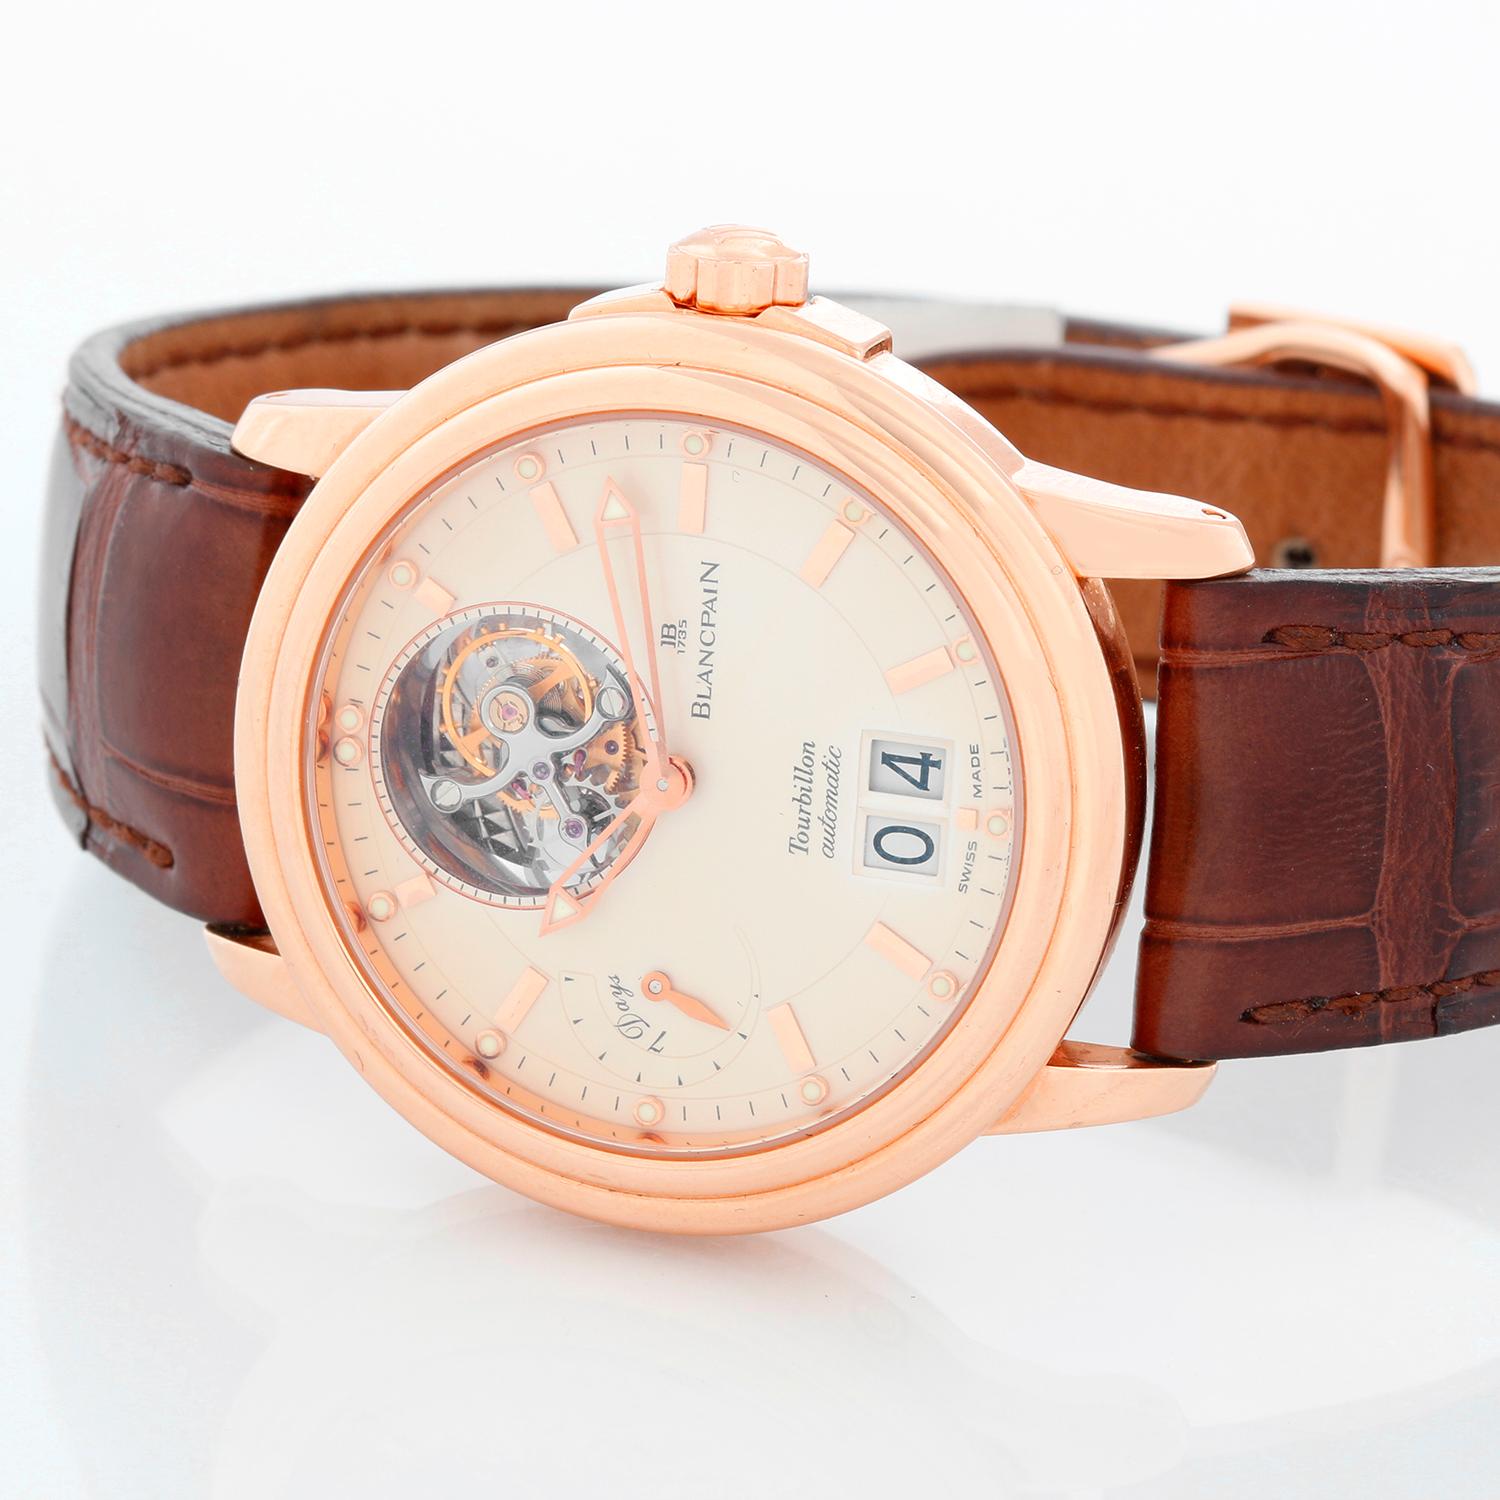 Blancpain 18K Rose Gold Leman Tourbillon Watch Ref 2825 - Automatic winding ; Tourbillon. 18K Rose gold case ( 38 mm). Creme dial with big date at 6 o'clock. Brown alligator strap with 18K Rose gold deployant buckle. Pre-owned with Blancpain box.